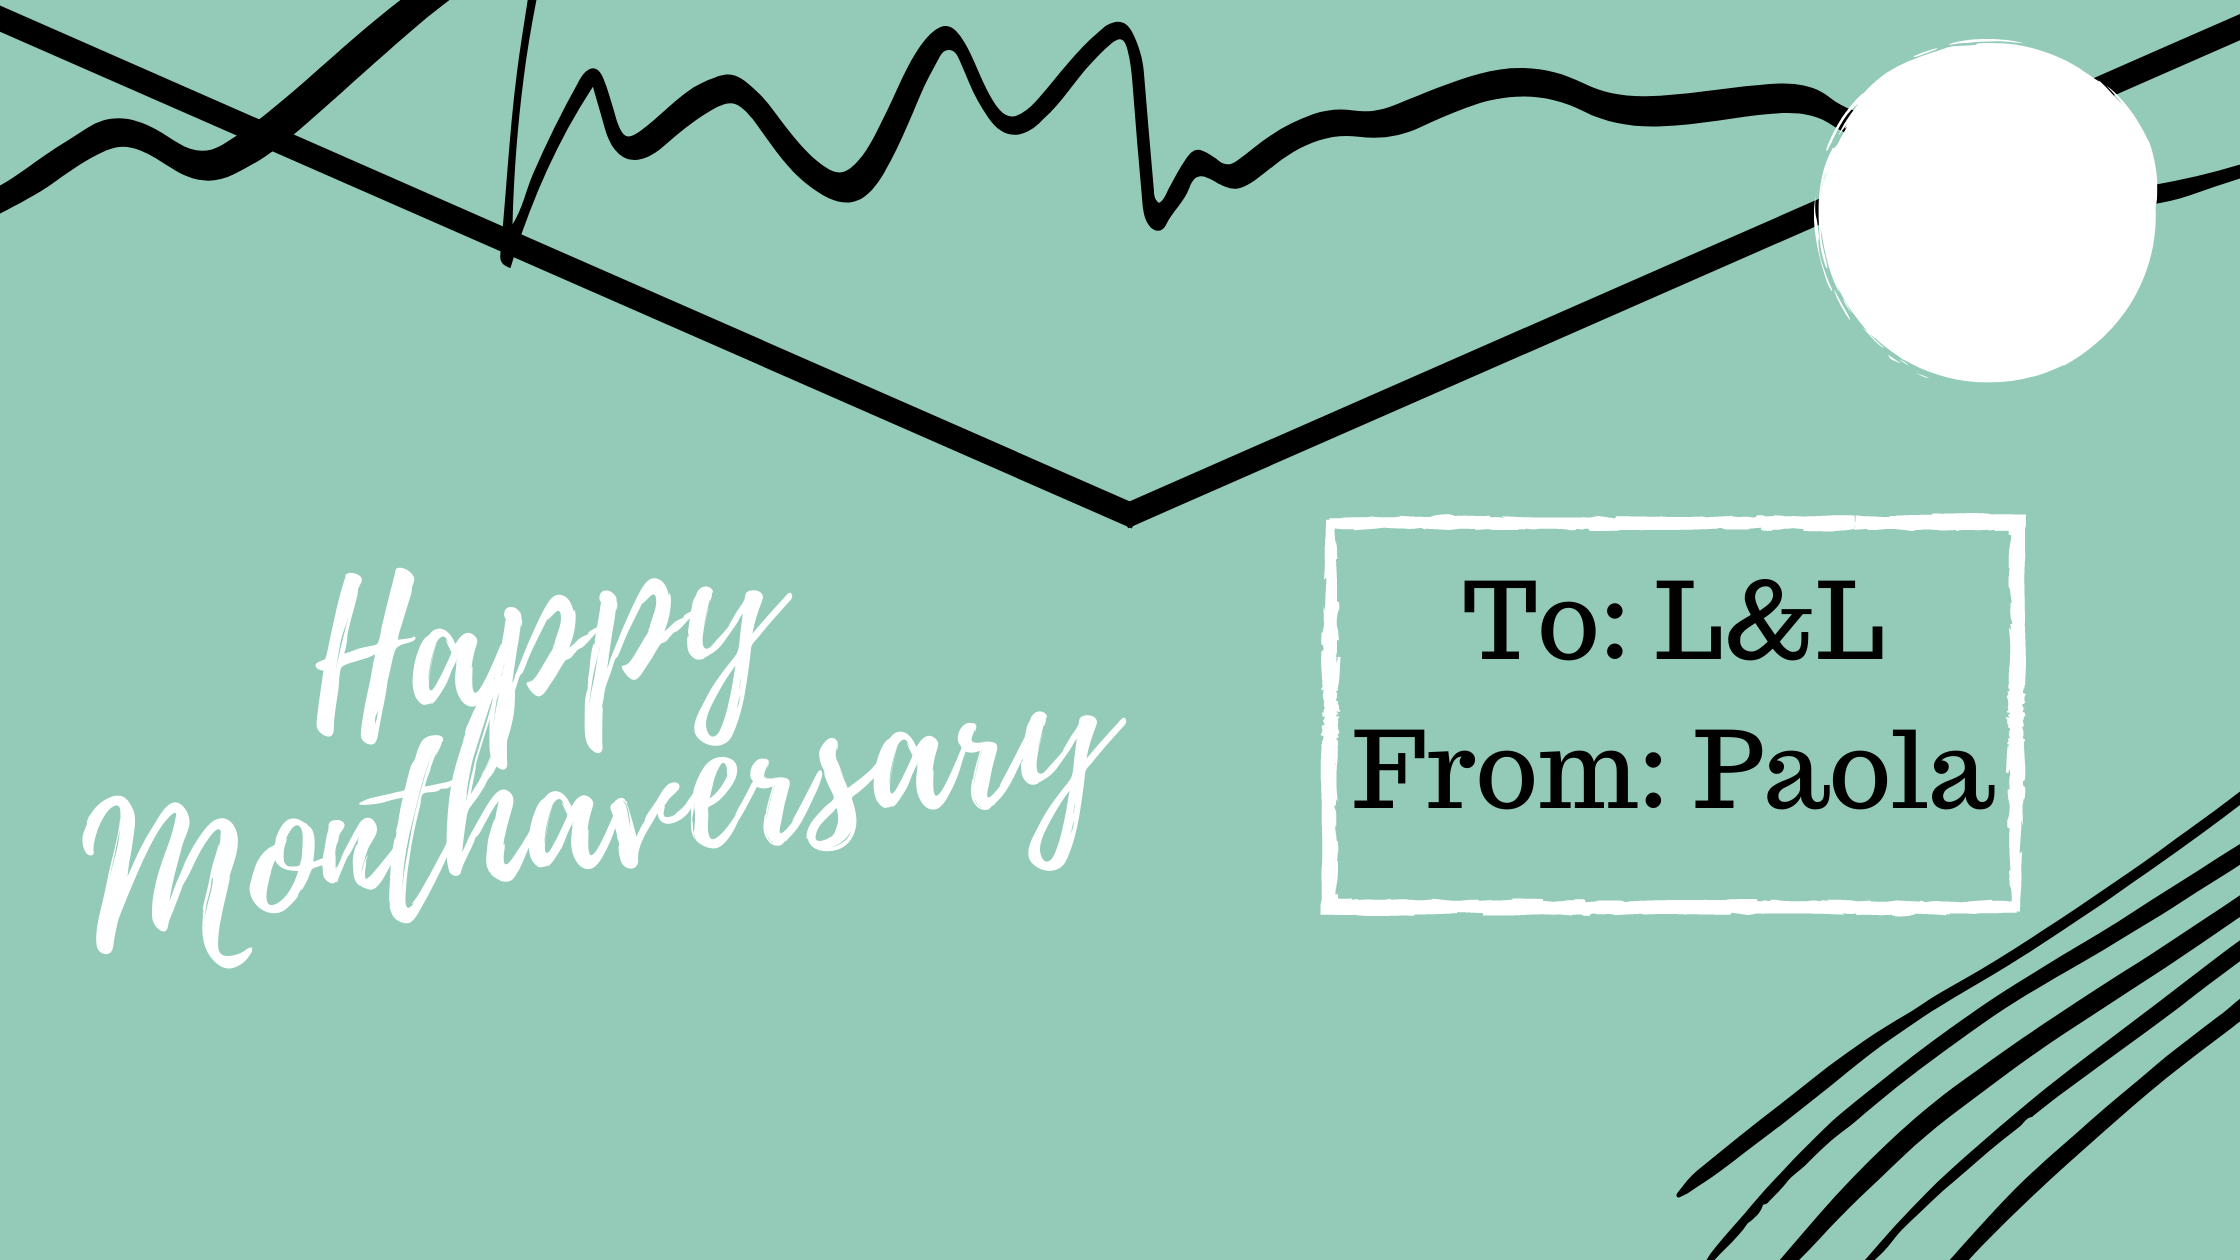 Happy Monthaversary! To: L&L, From: Paola